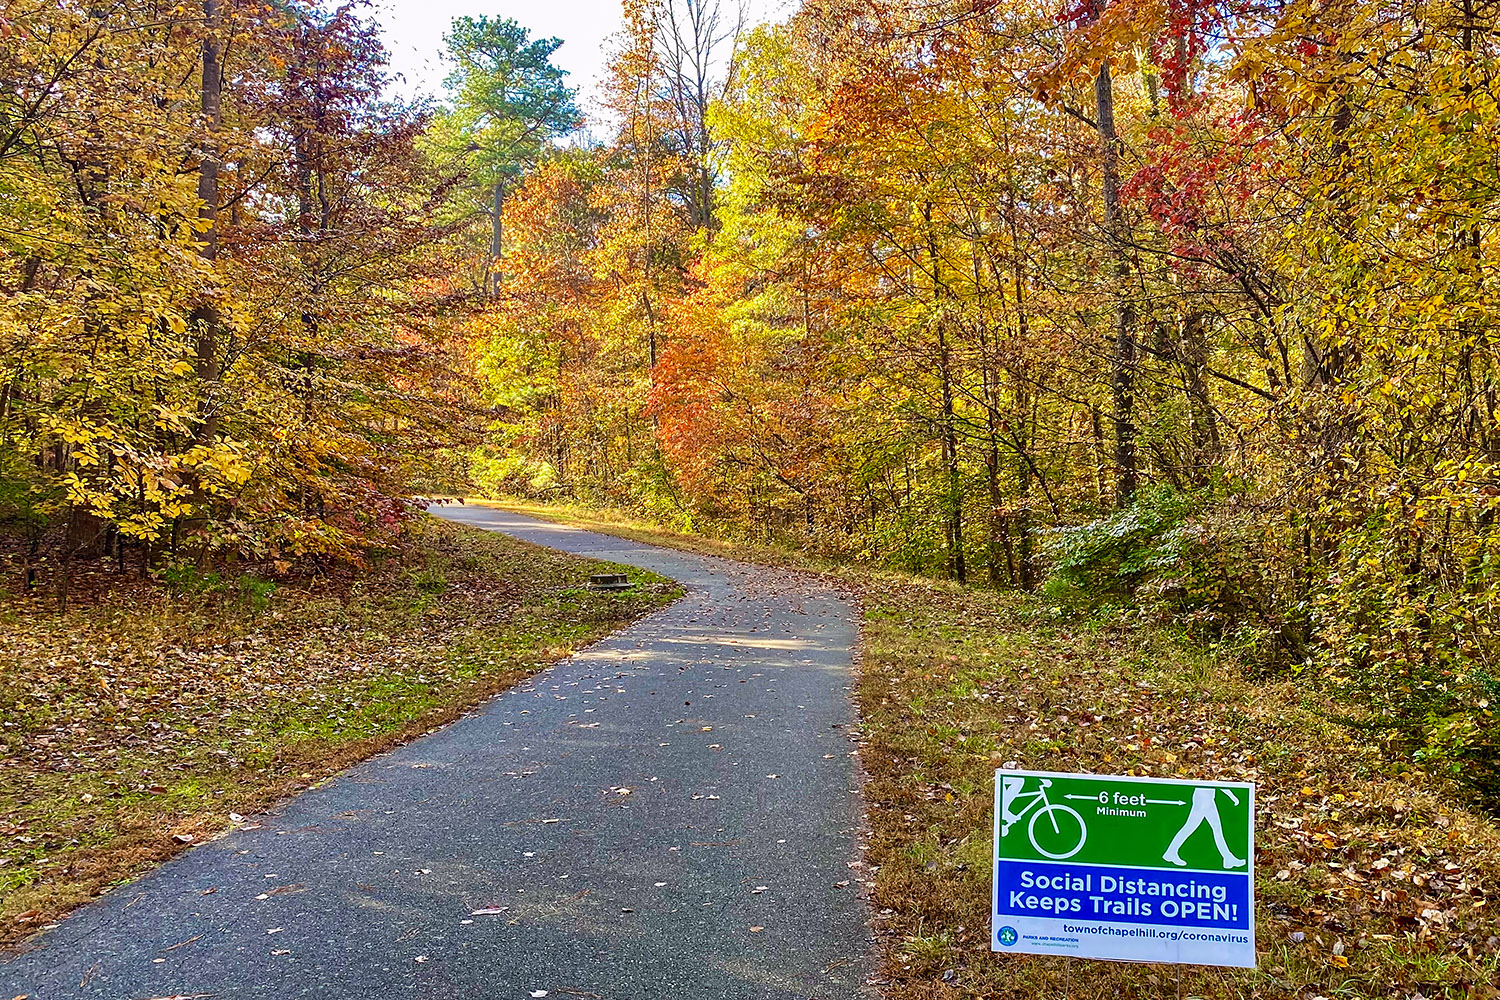 Back home on a path to Southern Community Park: We have colors, too!